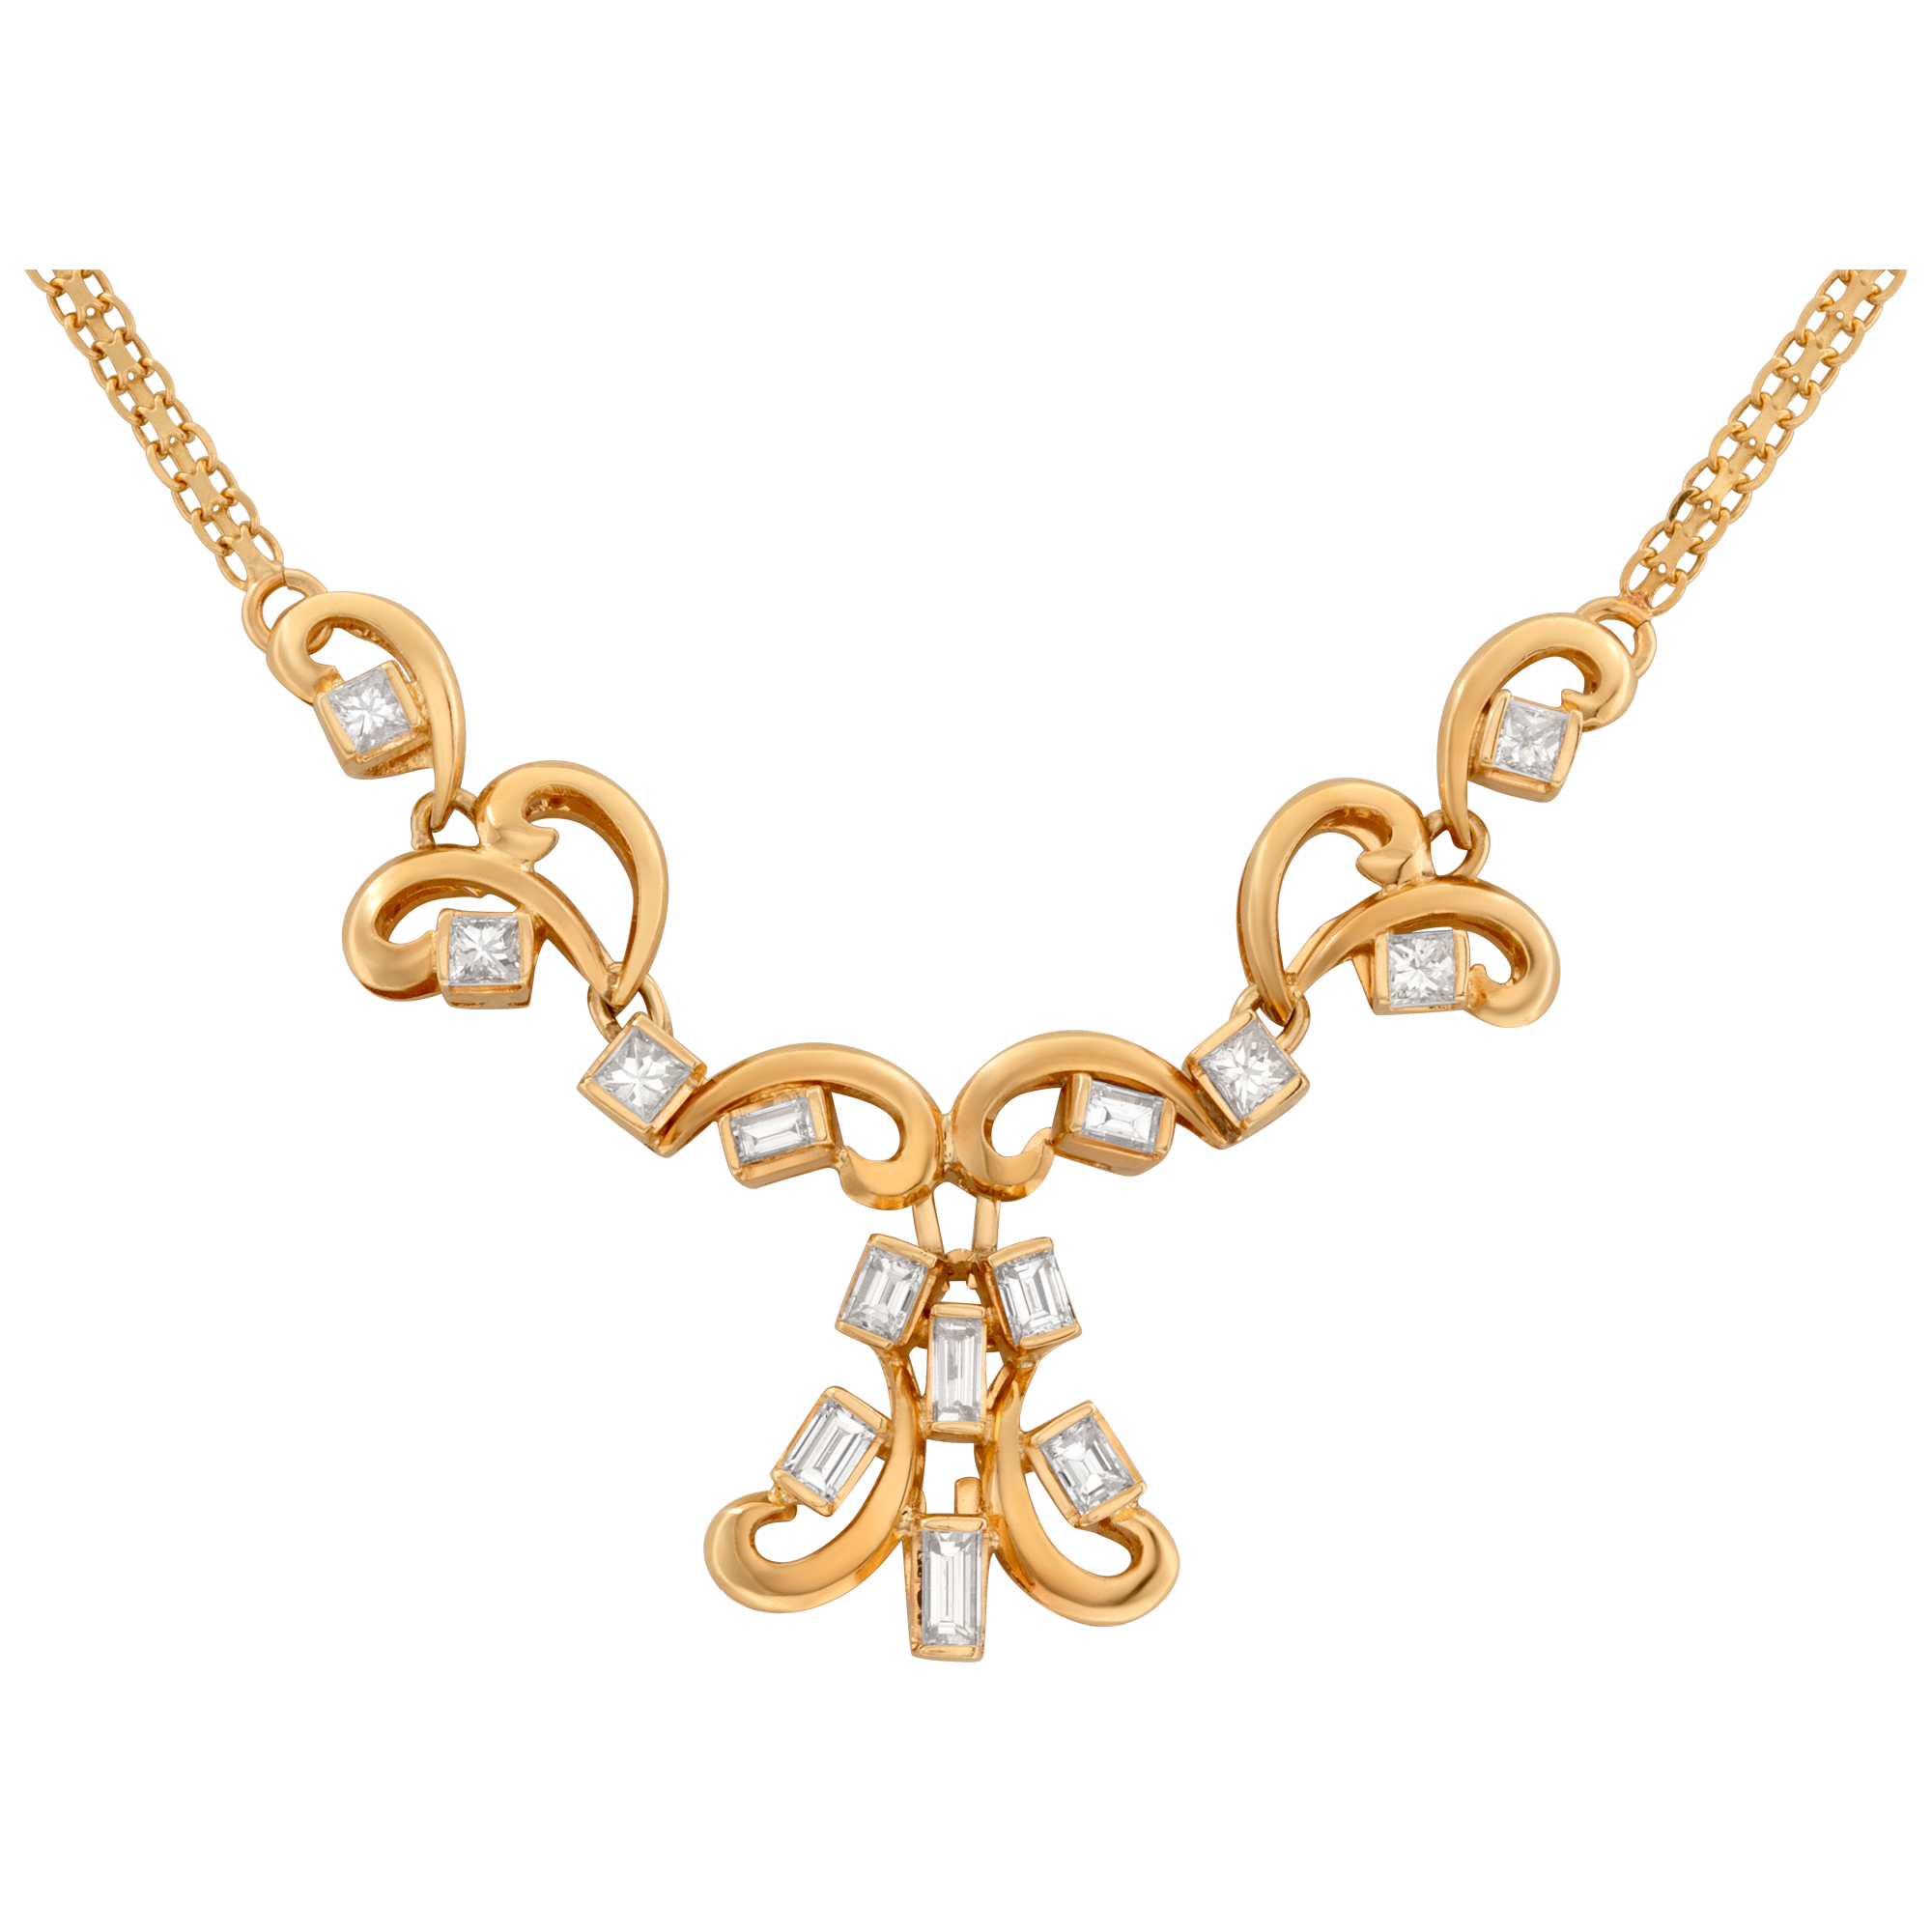 Swirl diamond necklace in 18k yellow gold with over 2 carats image 1